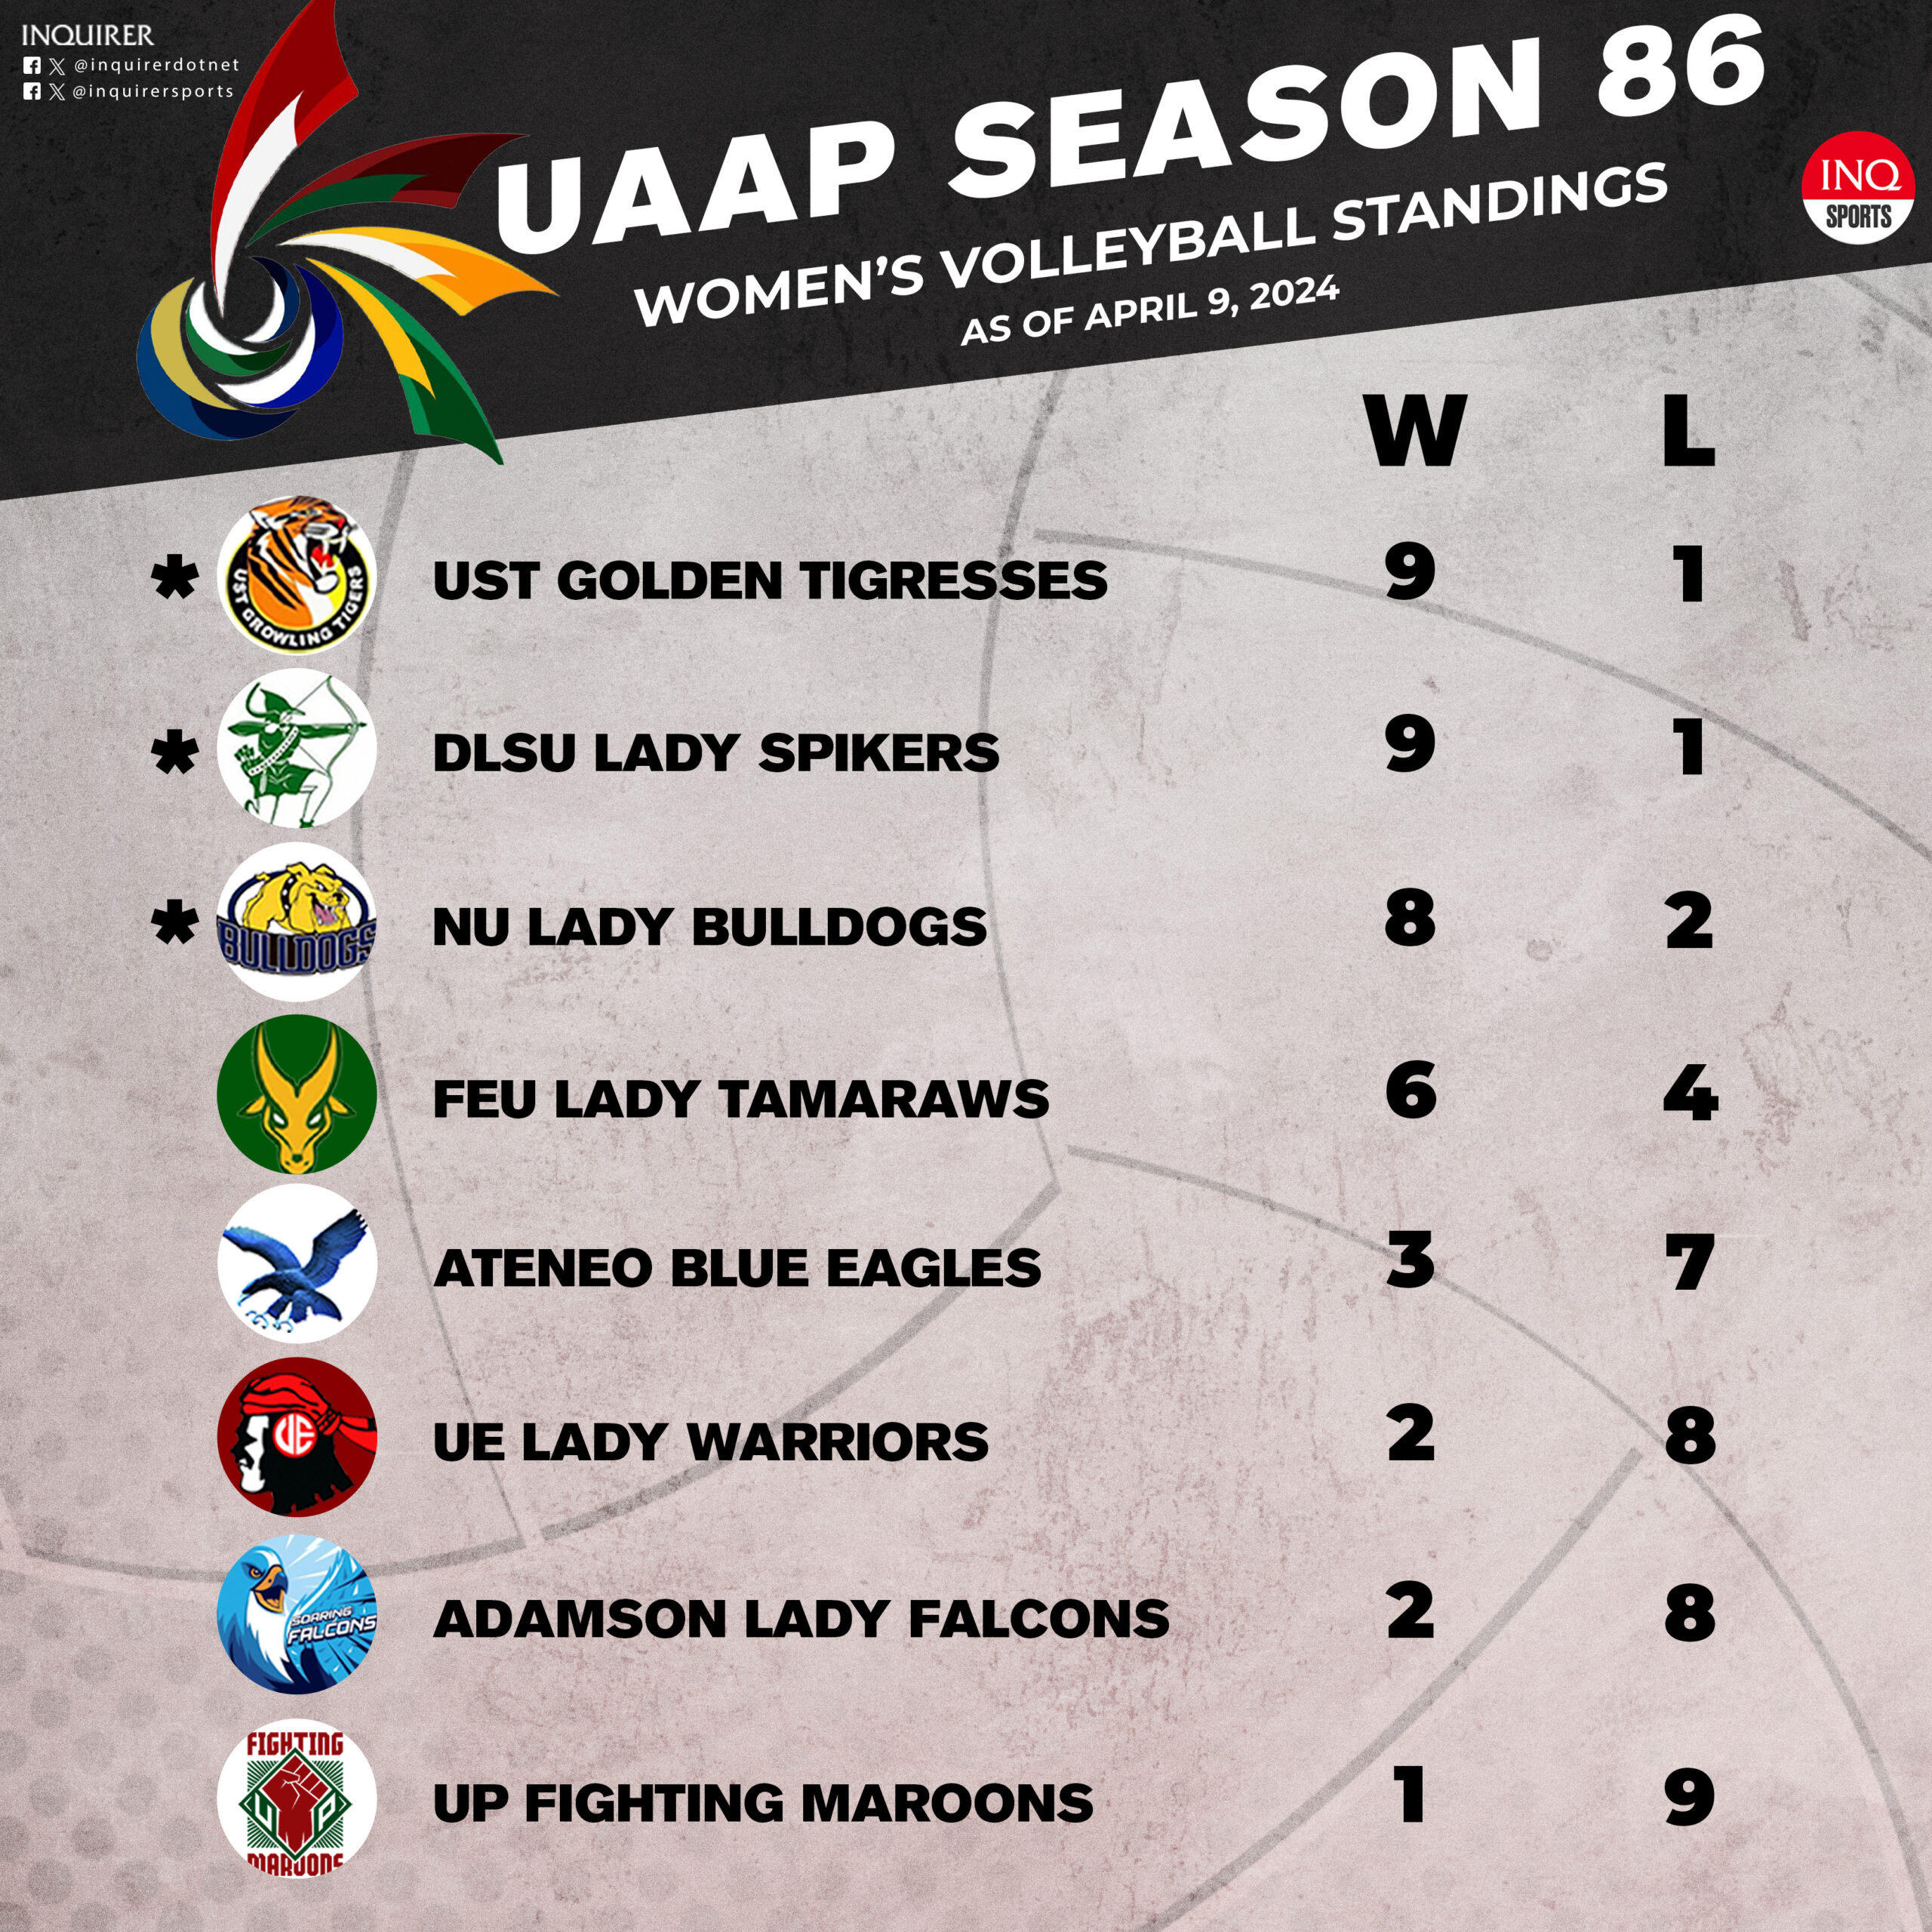 UAAP women's volleyball standings as of April 9